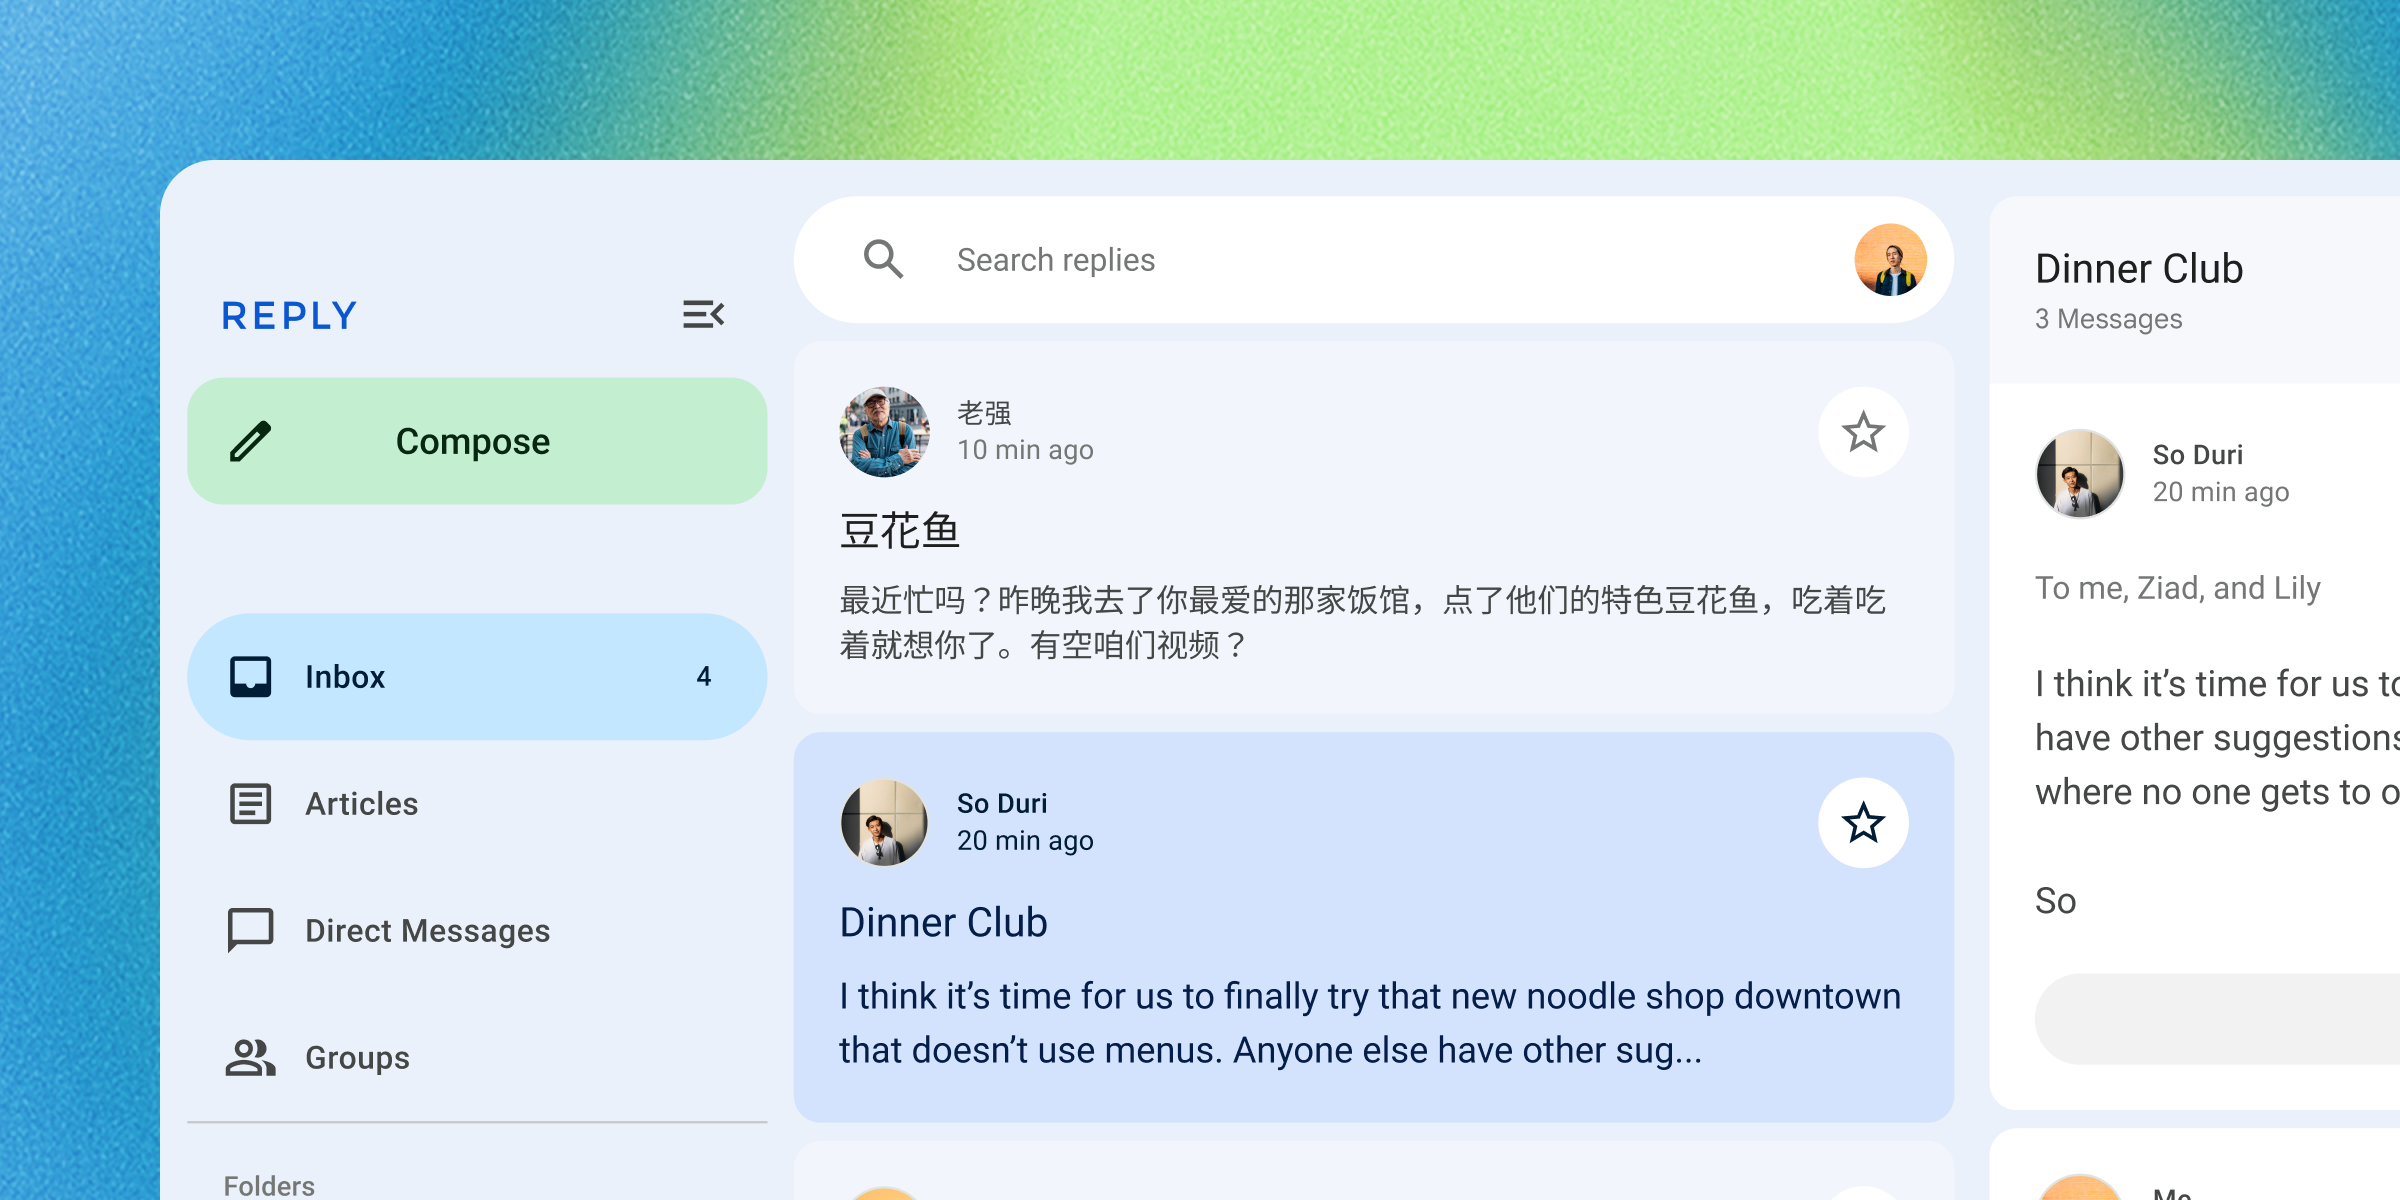 An example of a Material Design application.